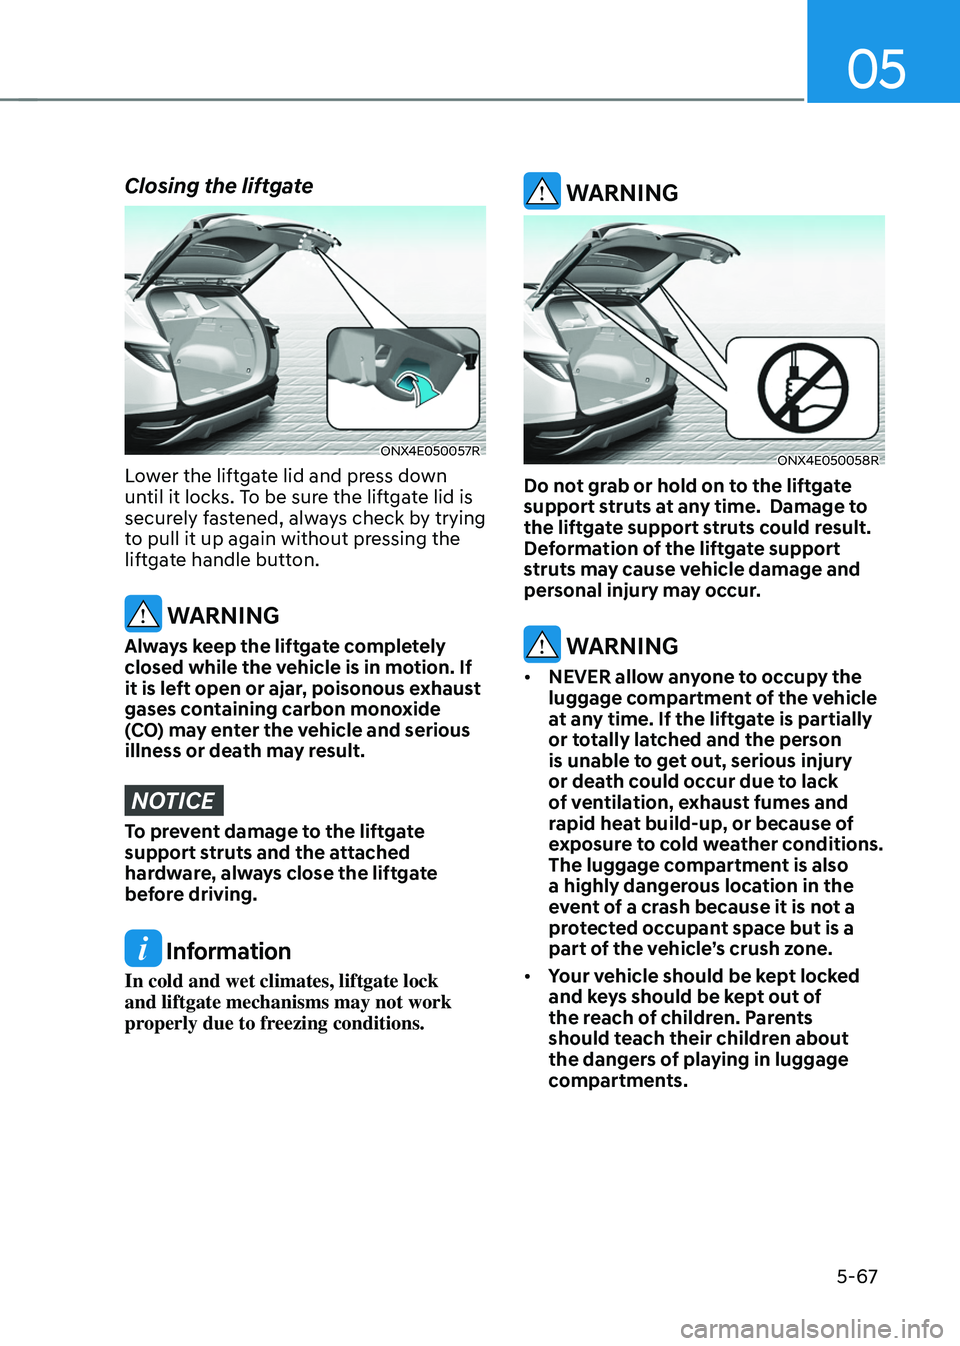 HYUNDAI TUCSON 2022  Owners Manual 05
5-67
Closing the liftgate
ONX4E050057R
Lower the liftgate lid and press down 
until it locks. To be sure the liftgate lid is 
securely fastened, always check by trying 
to pull it up again without 